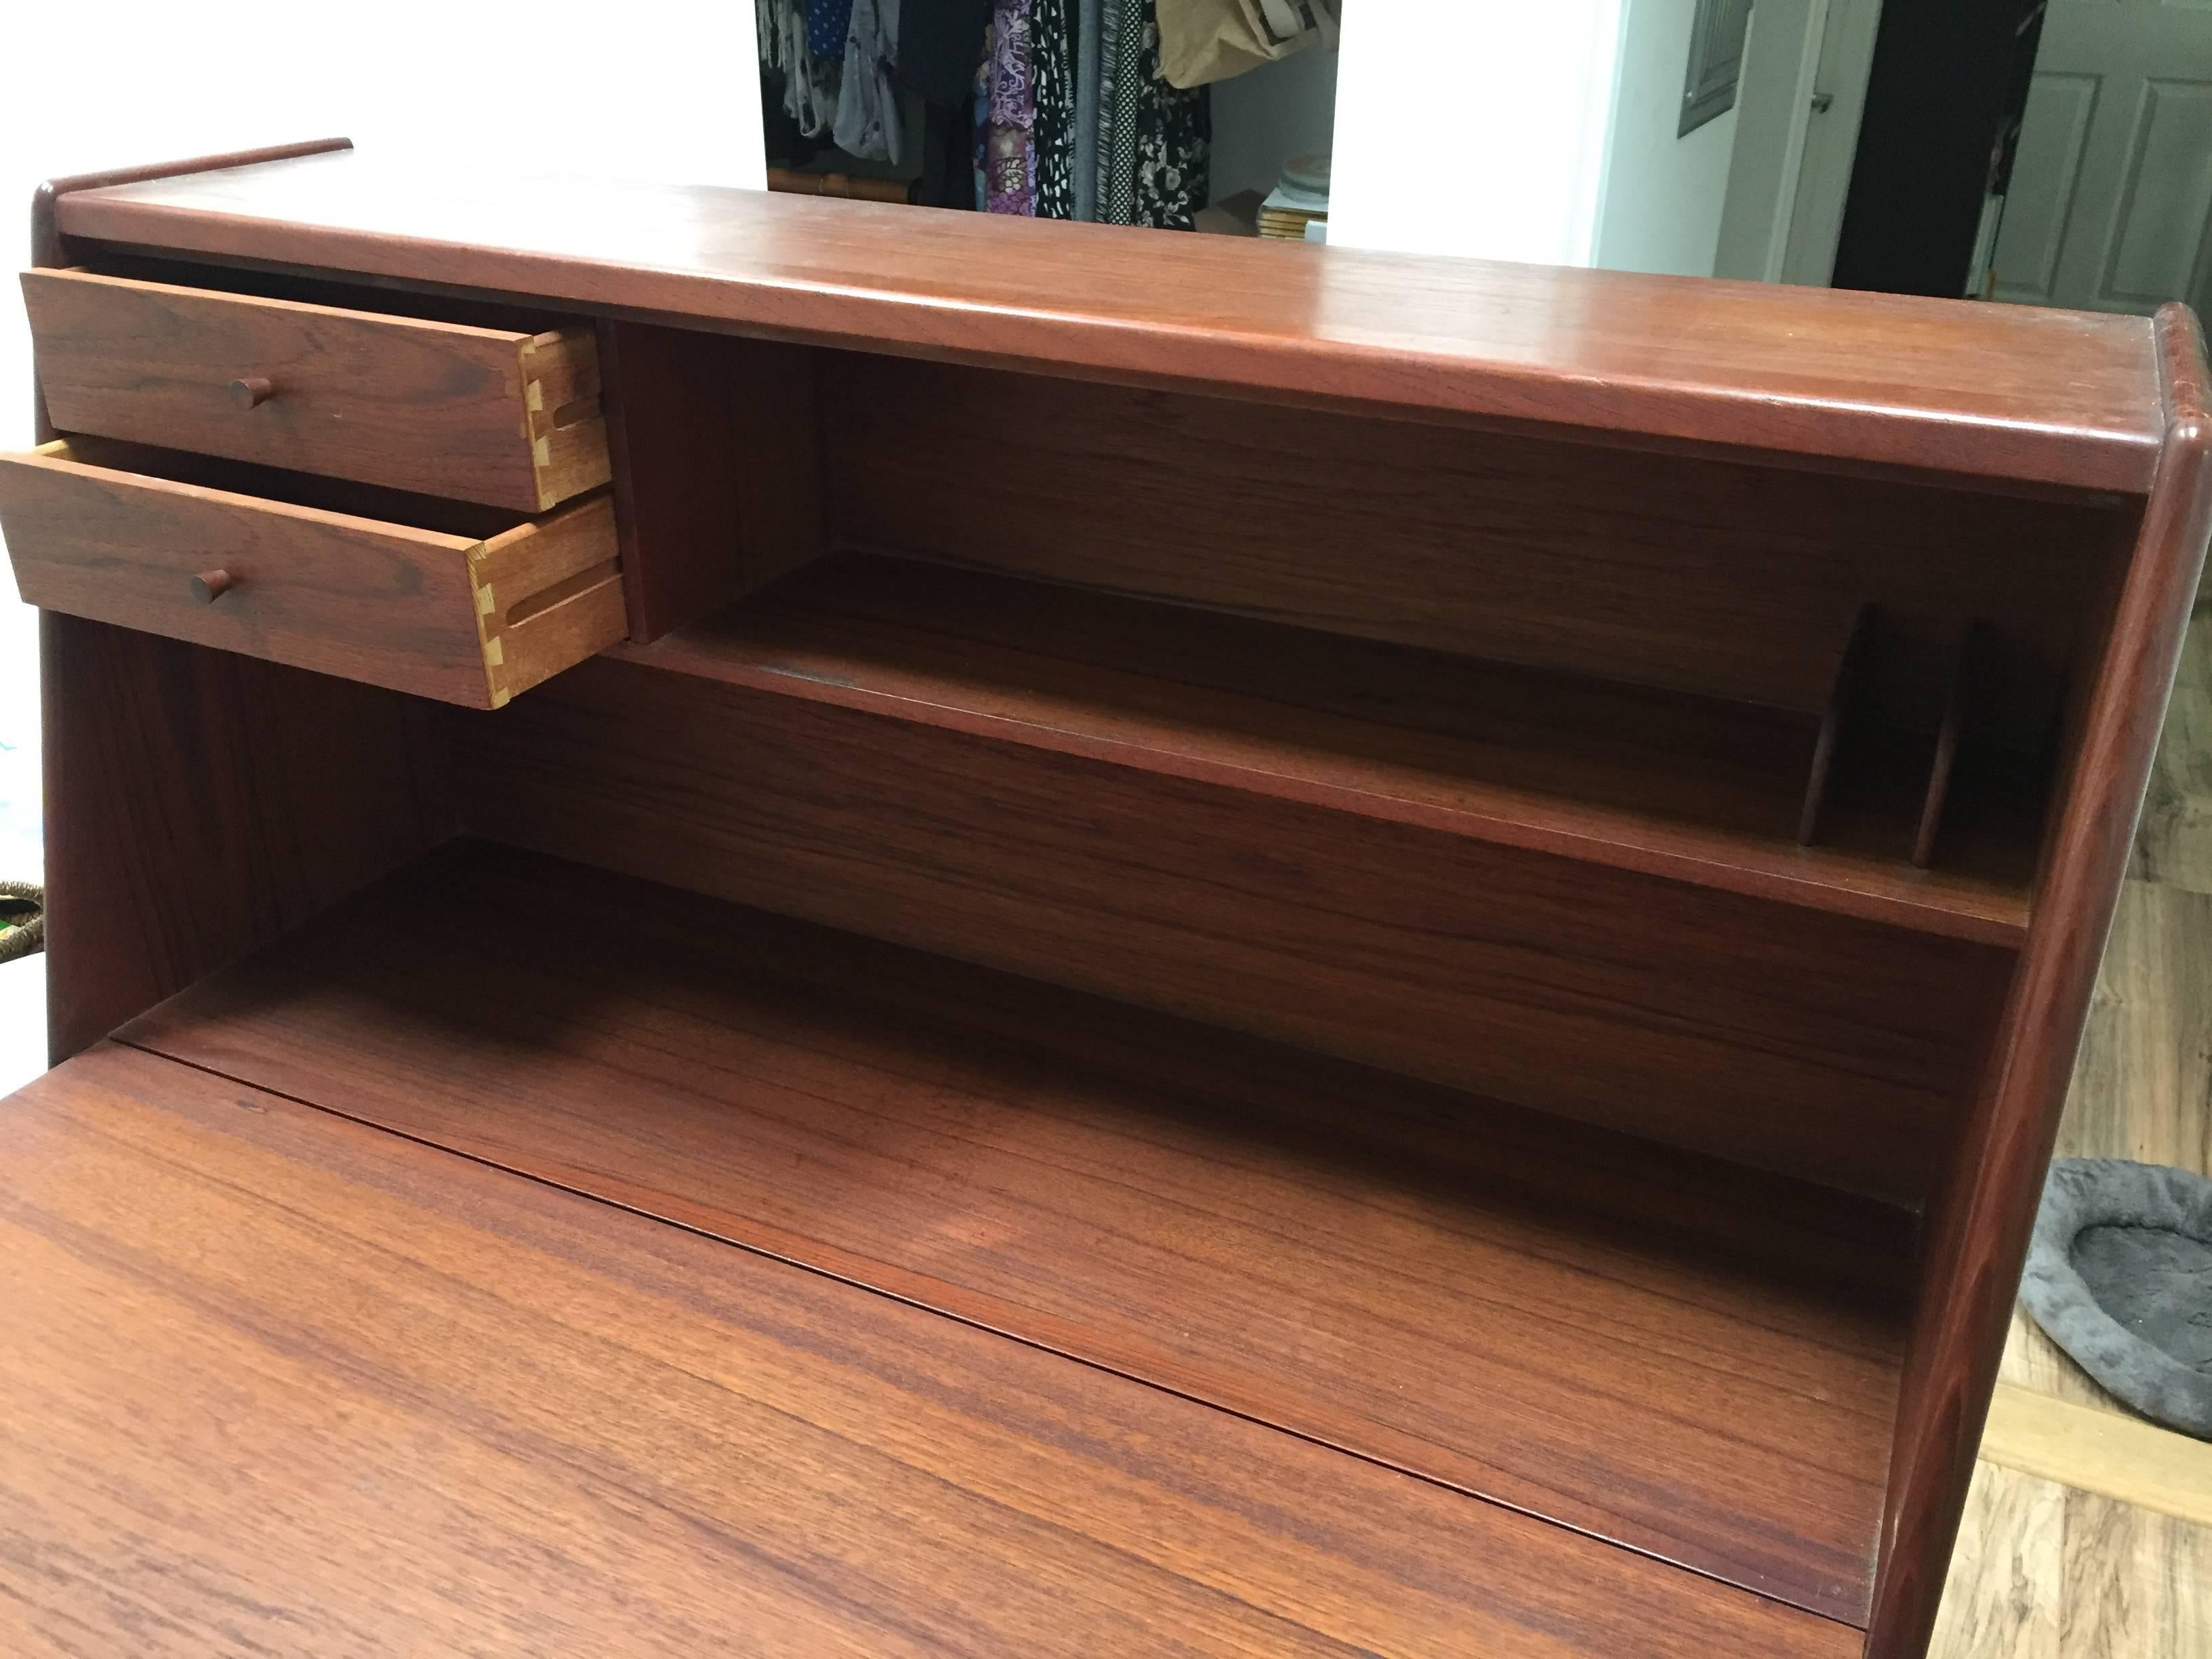 Medium size Mid-Century Modern secretary with flip-top desk, multi compartment with lock and original key and three drawers for much storage, excellent for small office with minimal footprint, ideal for someone with limited space.